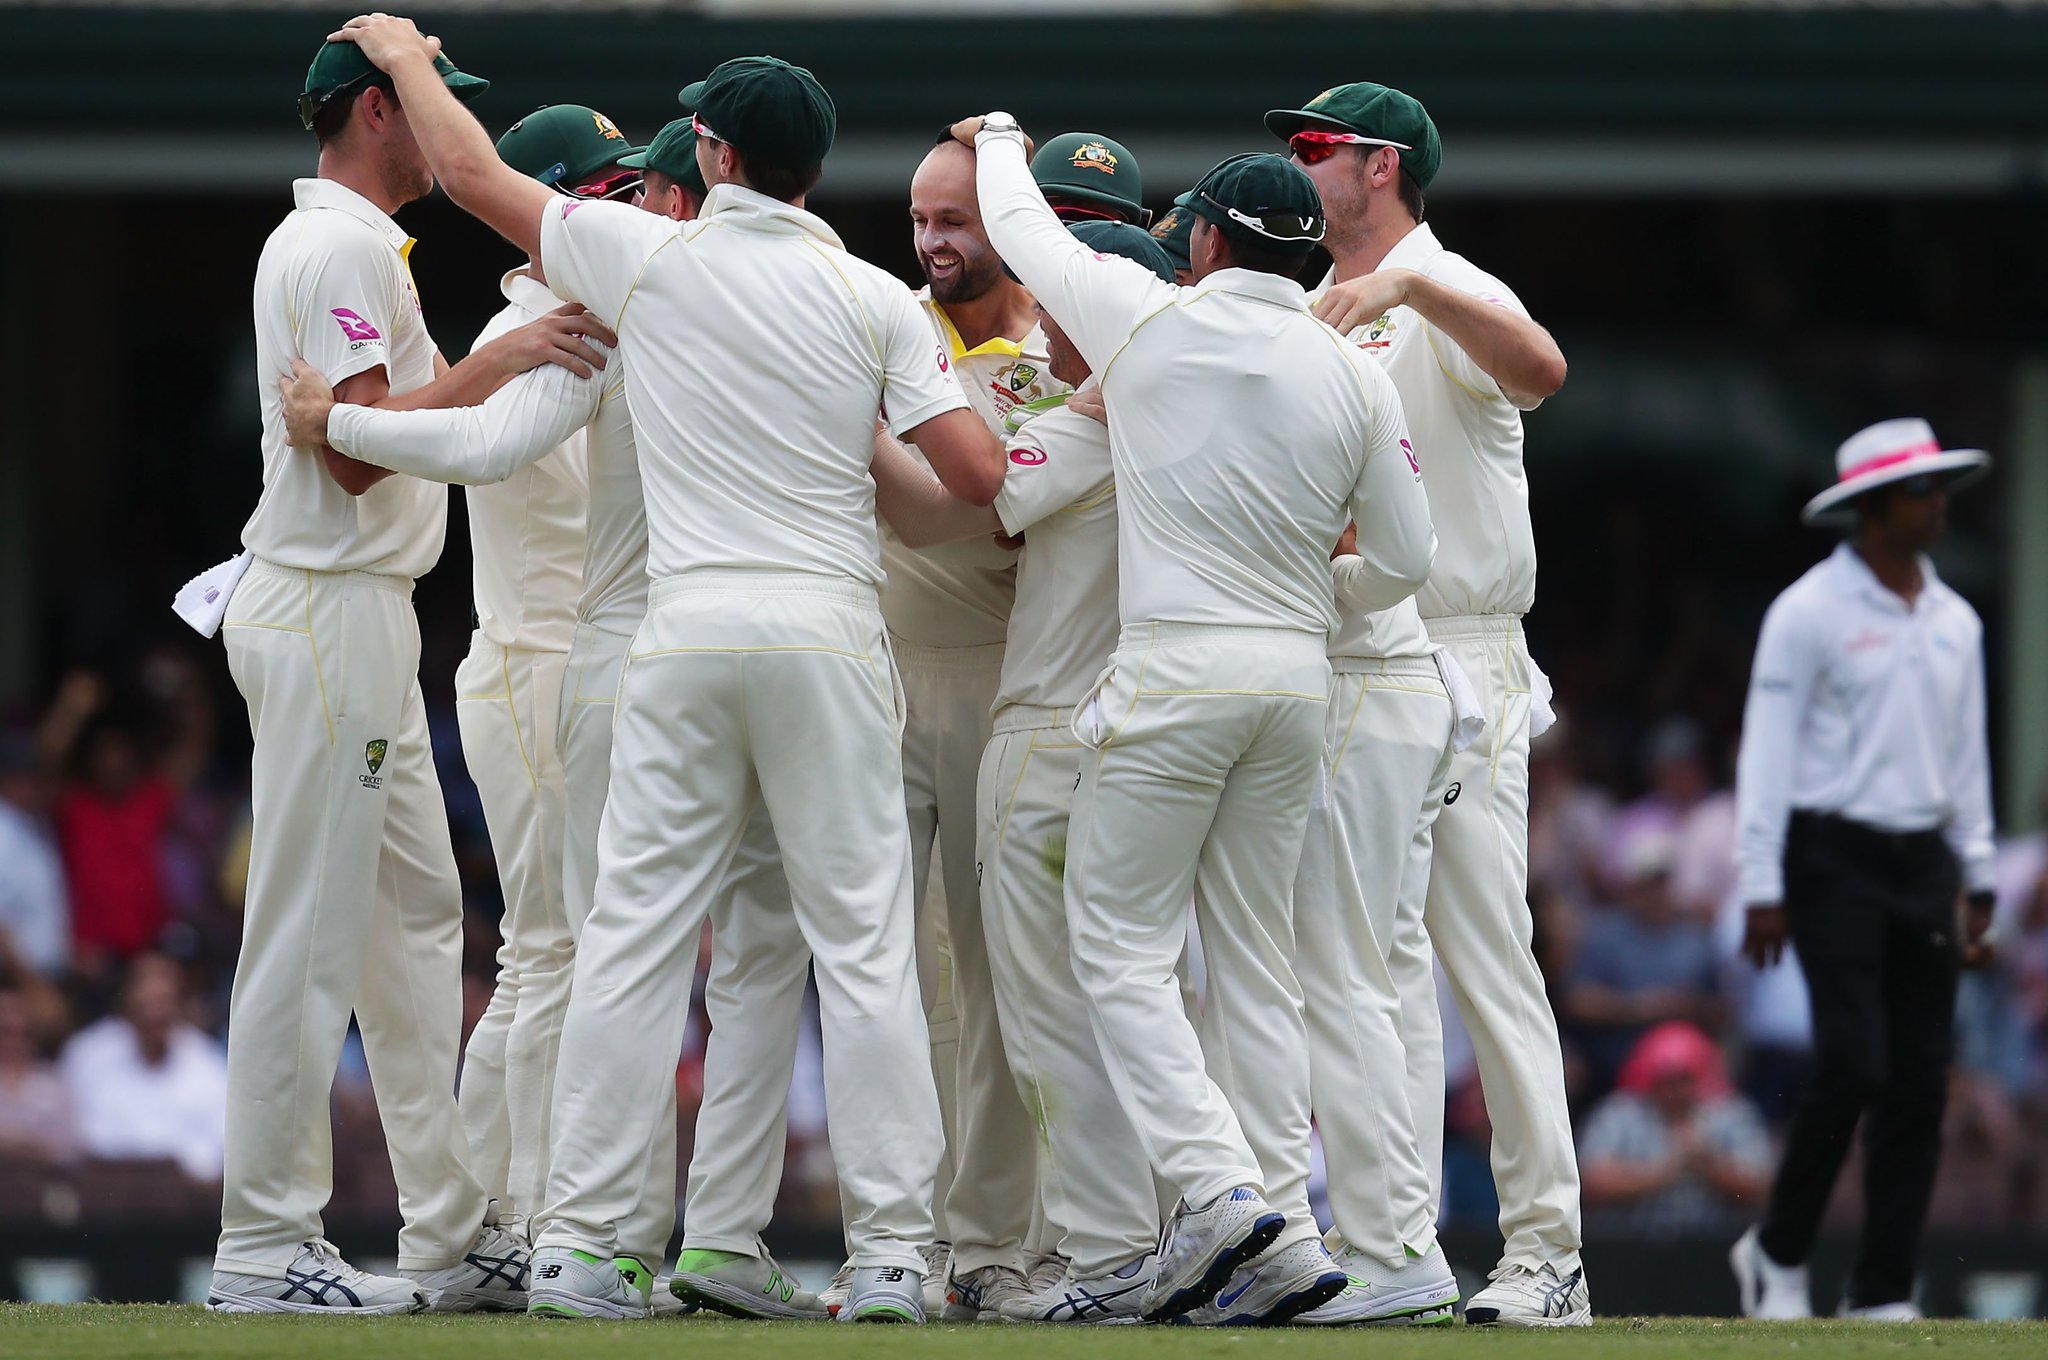 Ashes 2017/18: Twitter Reacts as Australia Inch Closer to Victory